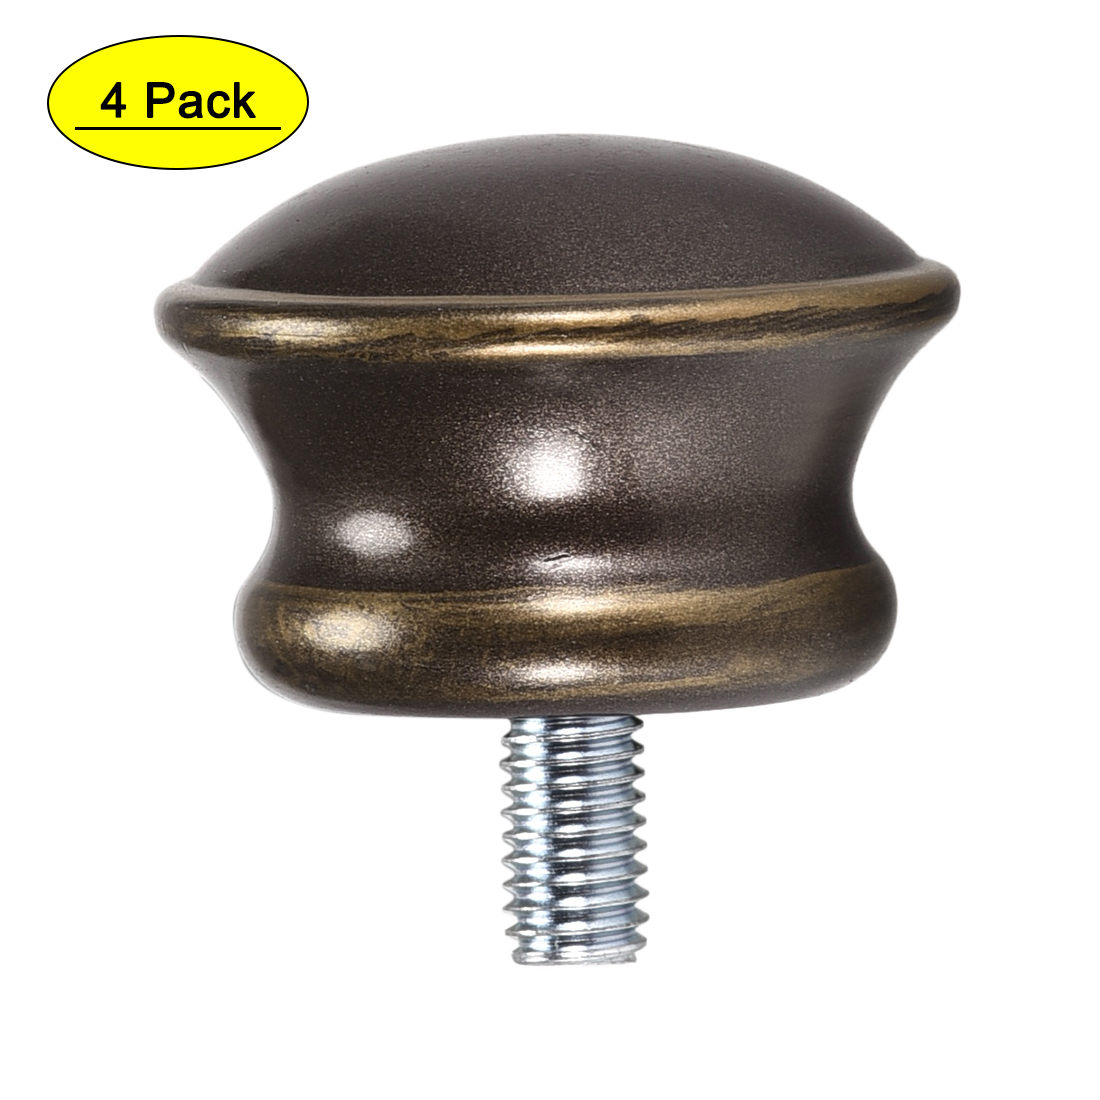 Uxcell Curtain Rod Finials Plastic M5 Thread Dia 1.1 inch x 1.06 inch Brown 4Pack - image 1 of 6